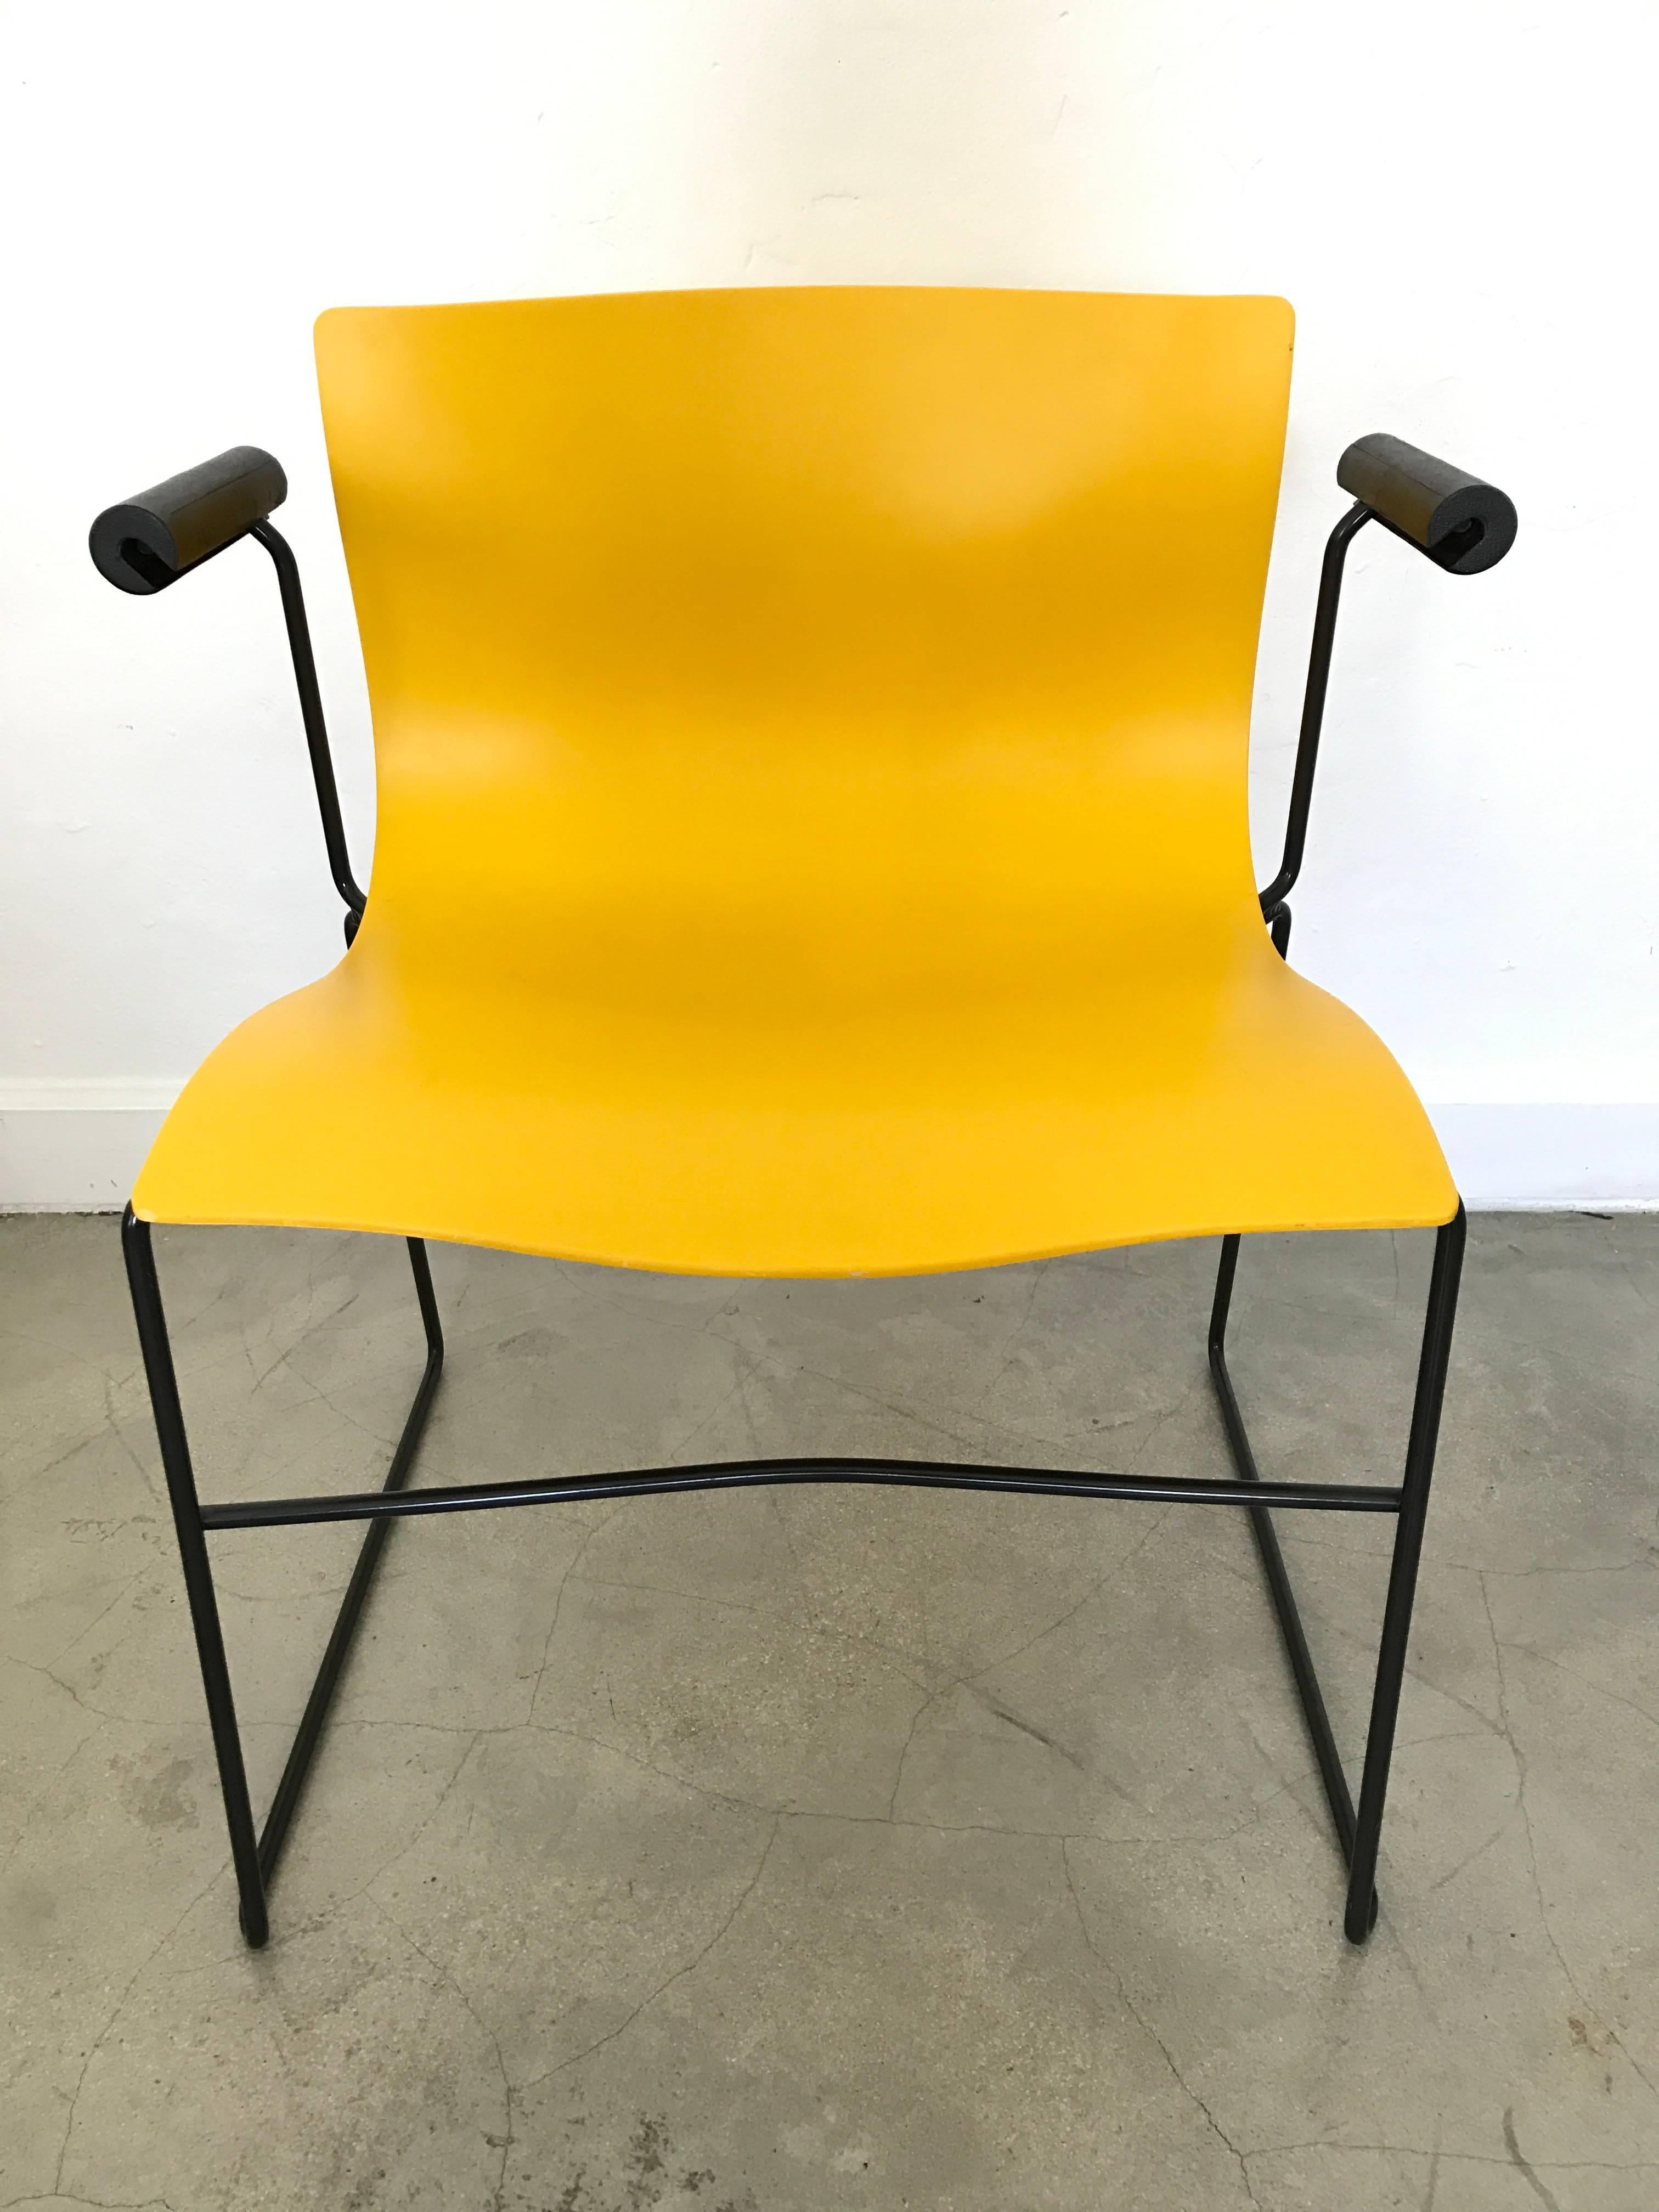 Four bright yellow sculpted dining or office chairs on a black enameled steel frame with cushion armrests by Lella and Massimo Vignelli for Knoll.